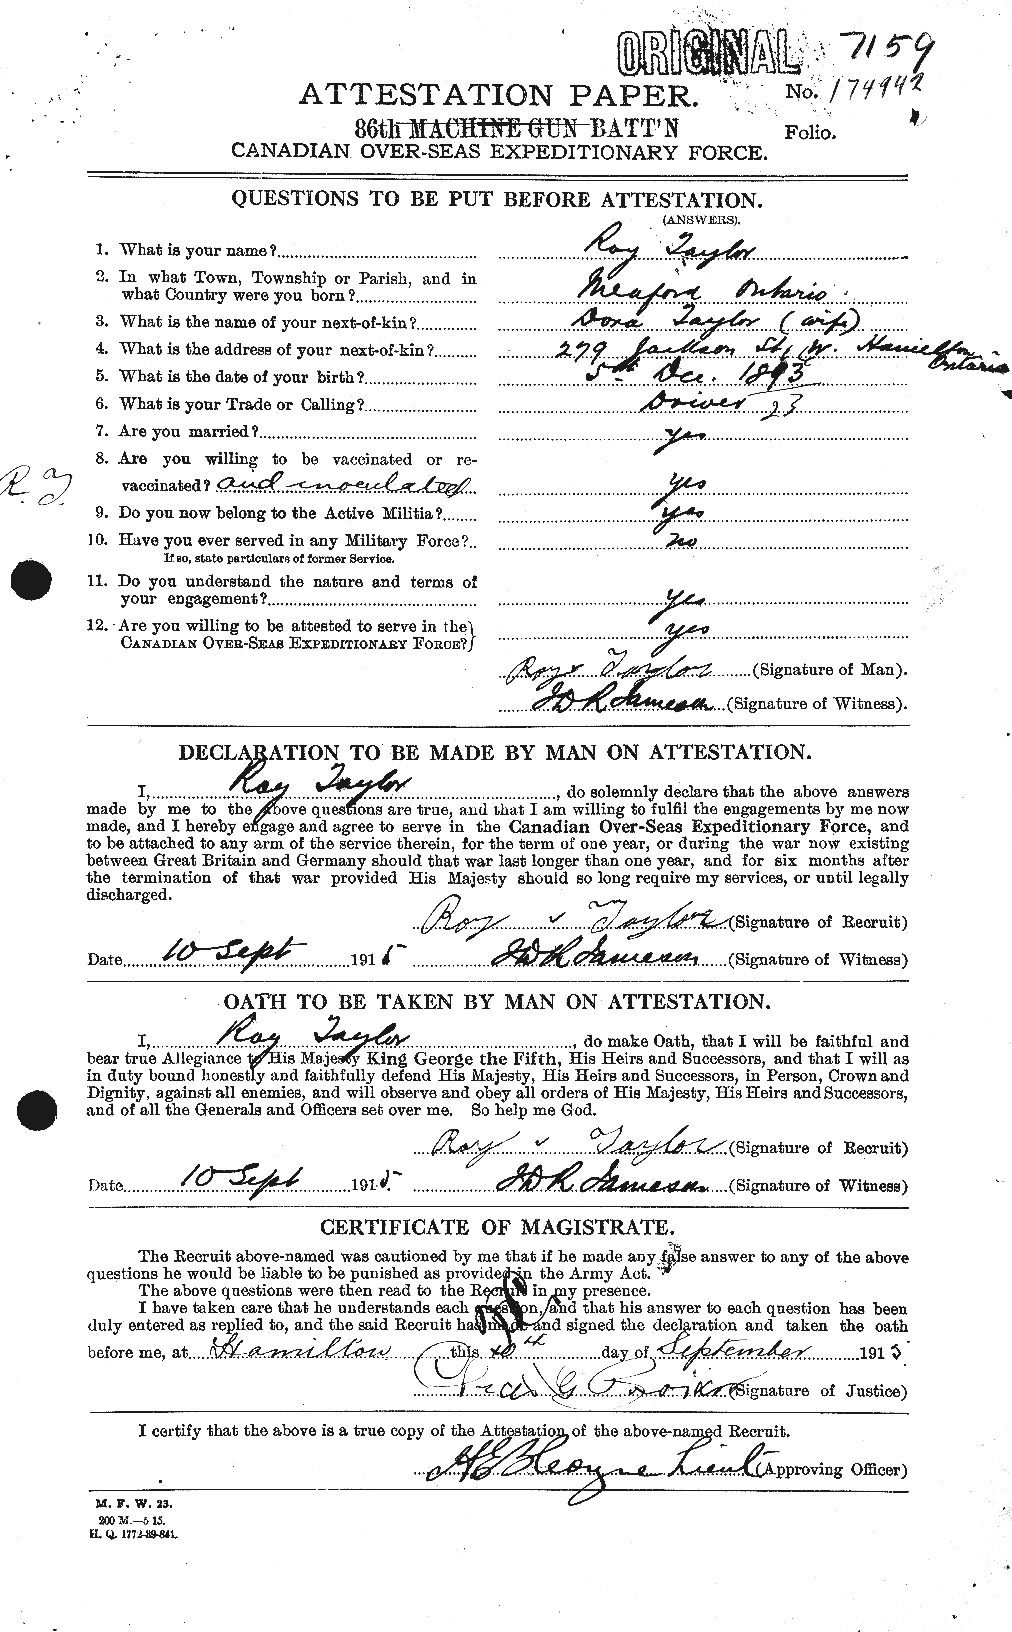 Personnel Records of the First World War - CEF 627519a